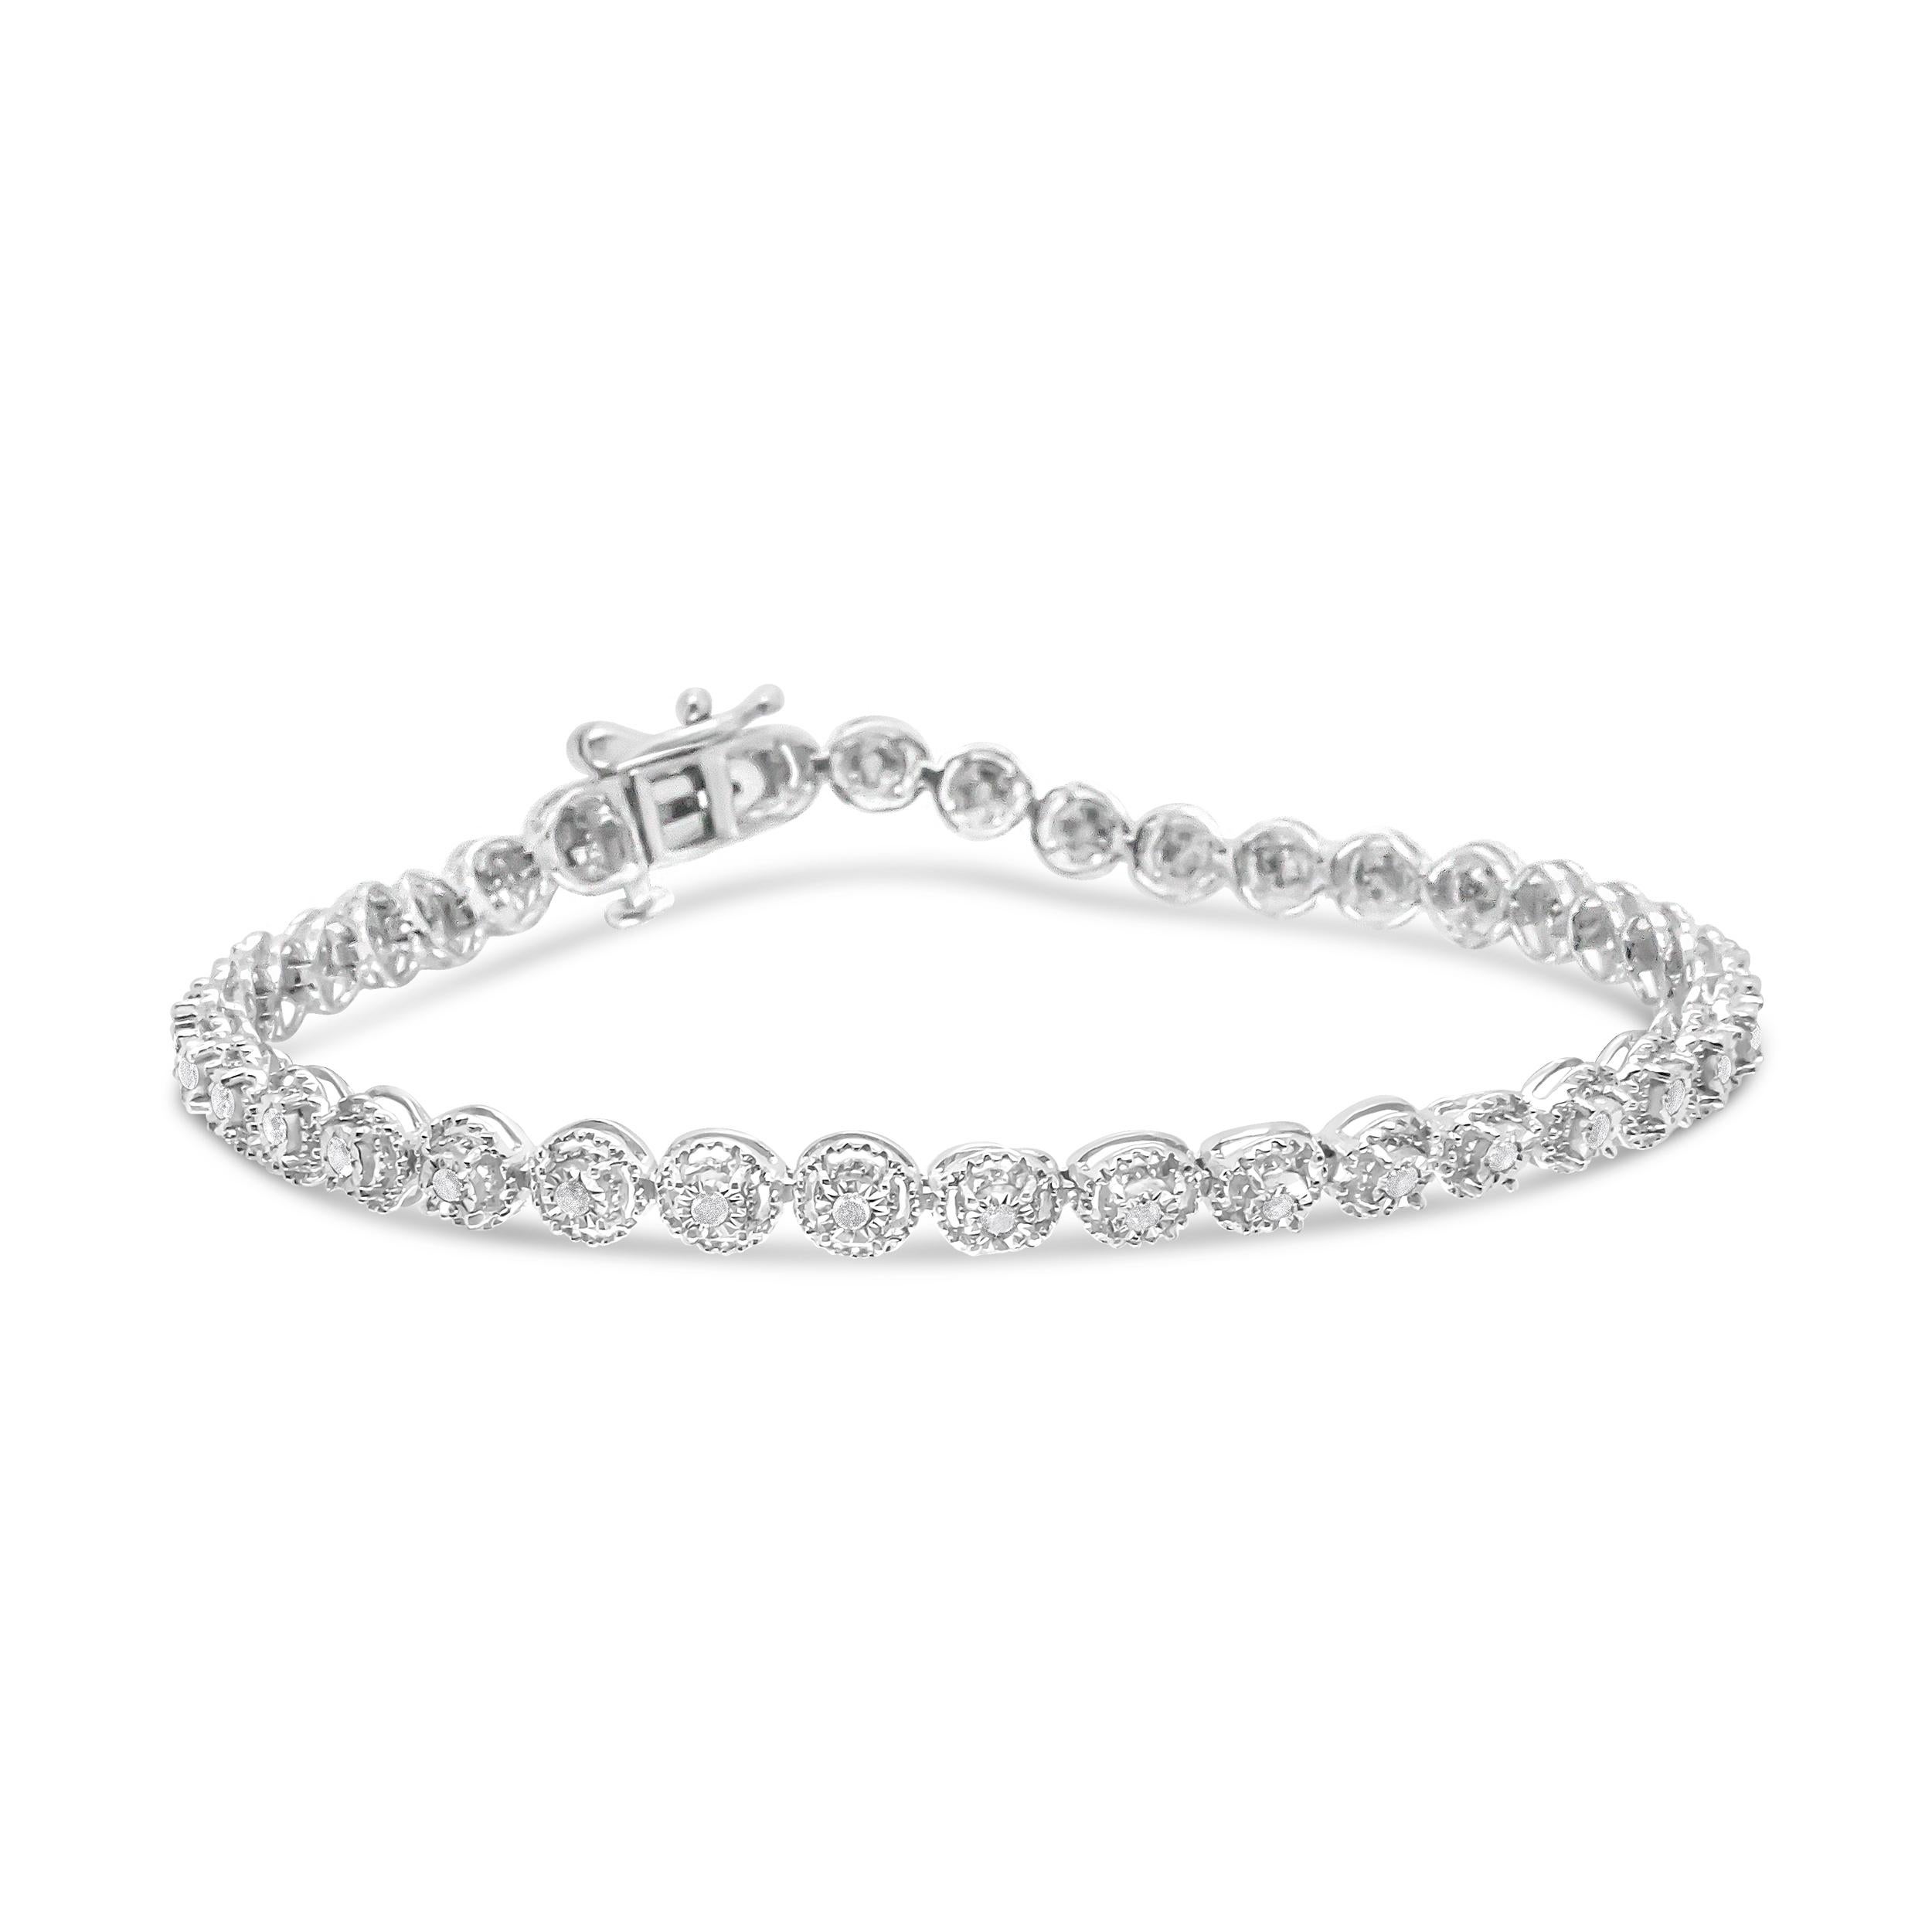 A circle represents eternal love. This sterling silver bracelet embraces that sentiment, with interlocking rings that hold round cut diamonds at the center. Wrapped around in an endless loop and embellished with fine milgrain design work, it's a